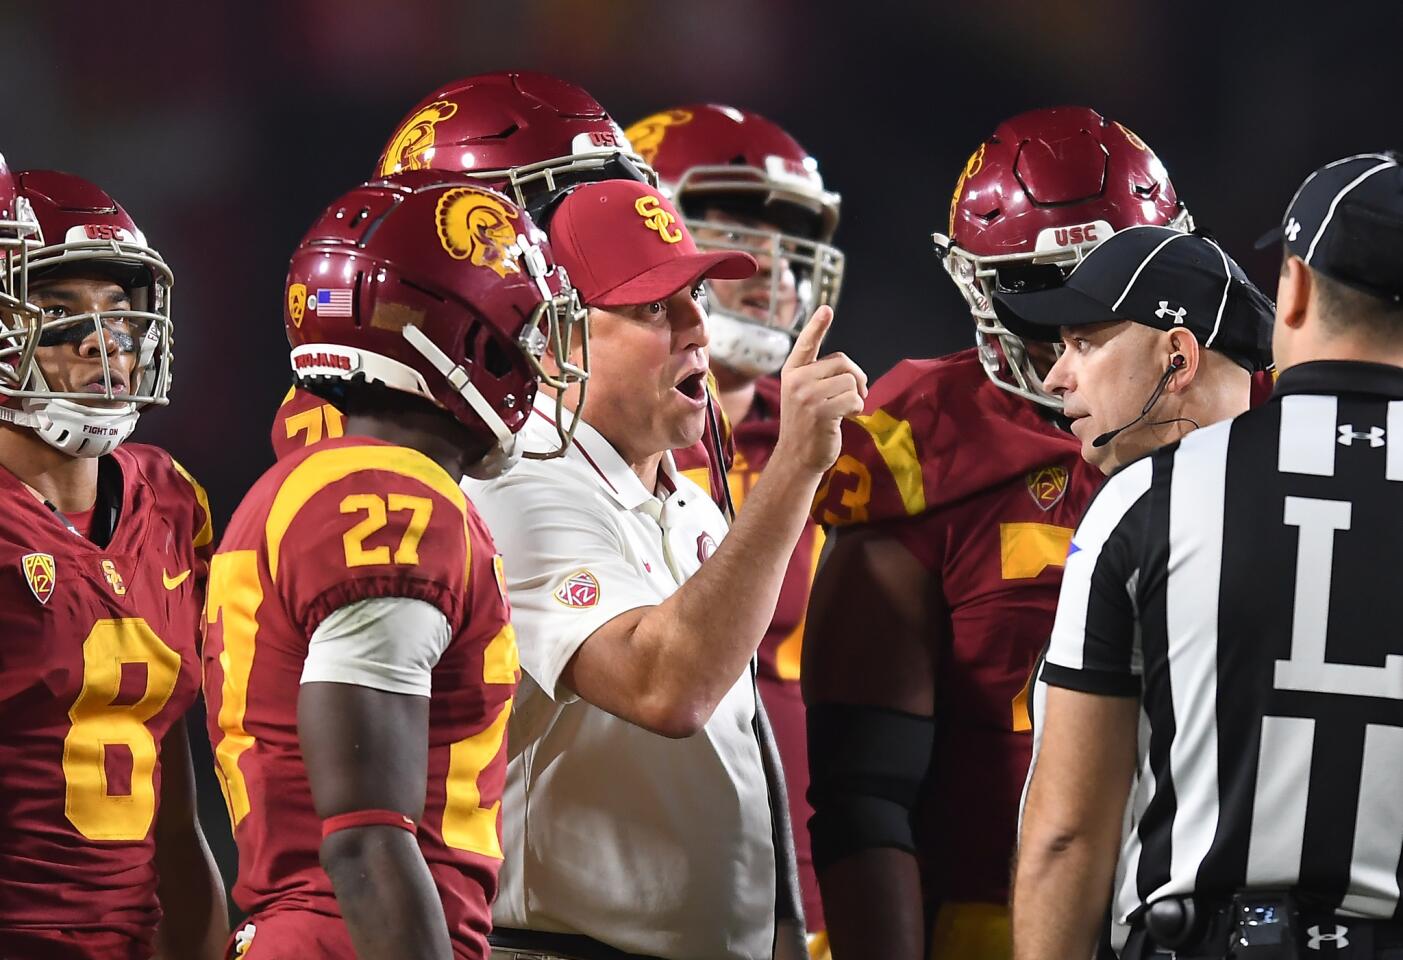 USC head coach Clay Helton complains to officials in the second quarter at the Coliseum Saturday.